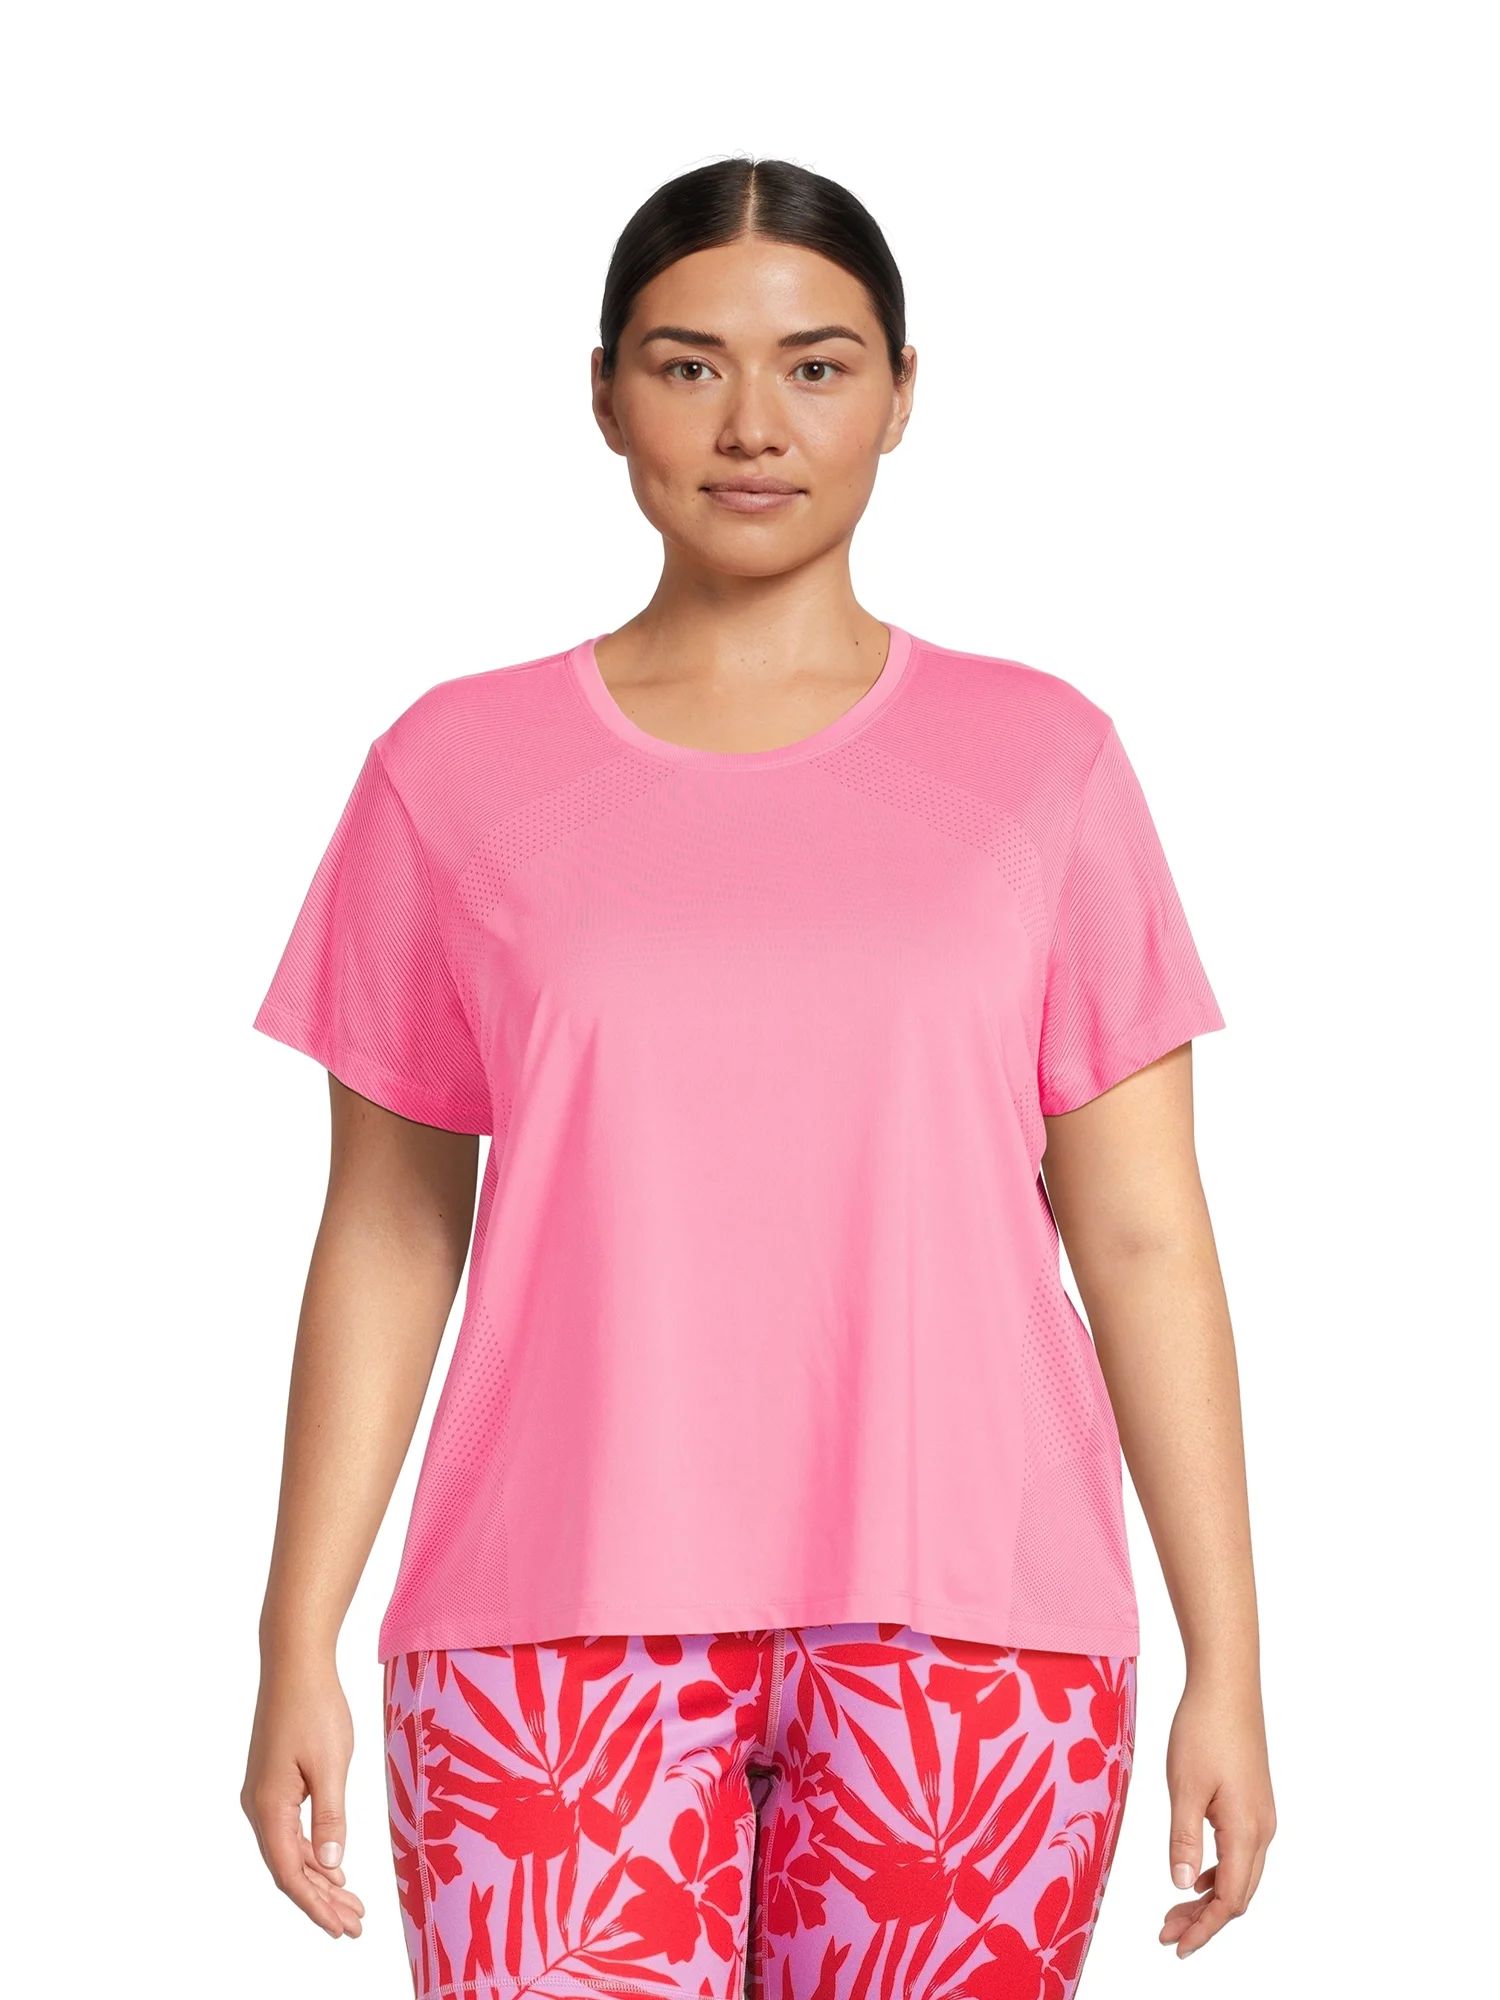 Avia Women’s Perforated Performance T-Shirt with Short Sleeves, Sizes S-XXXL | Walmart (US)